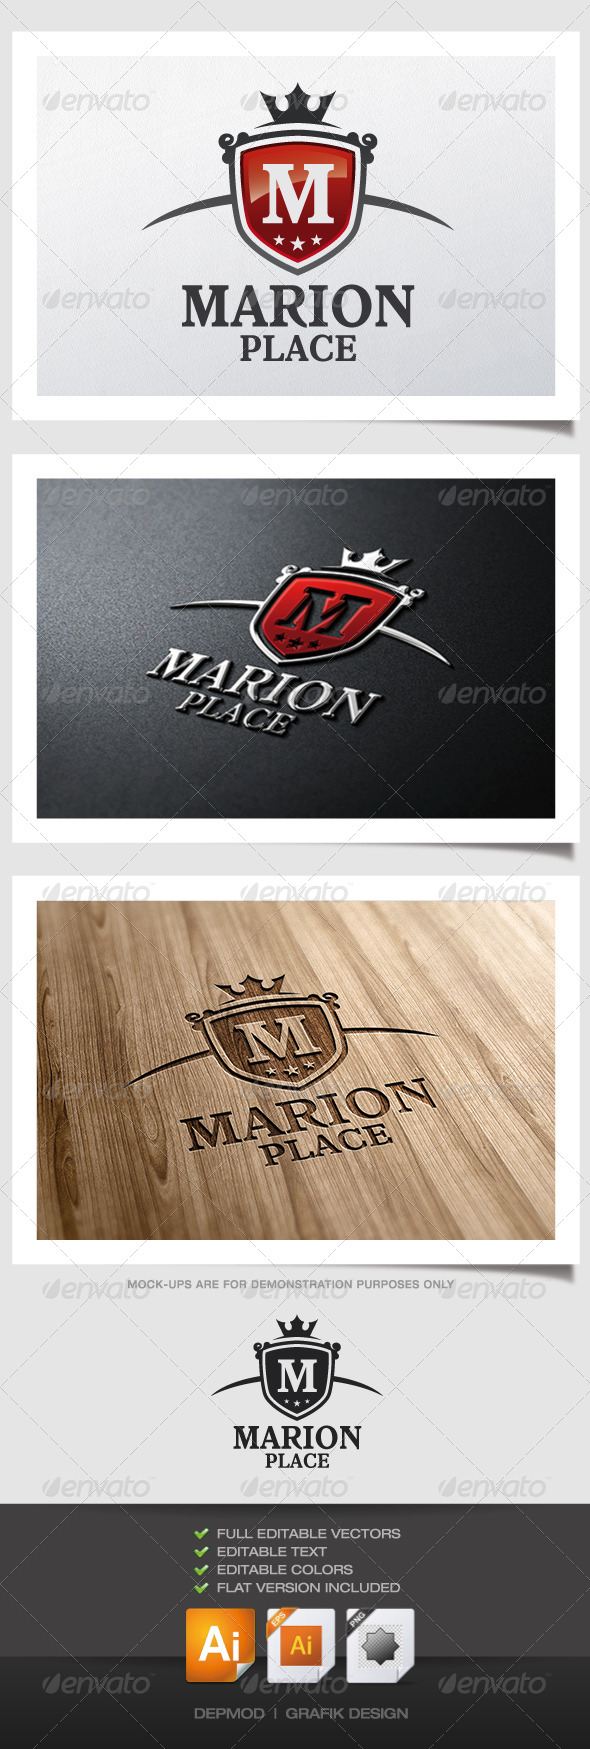 Marion Place Logo